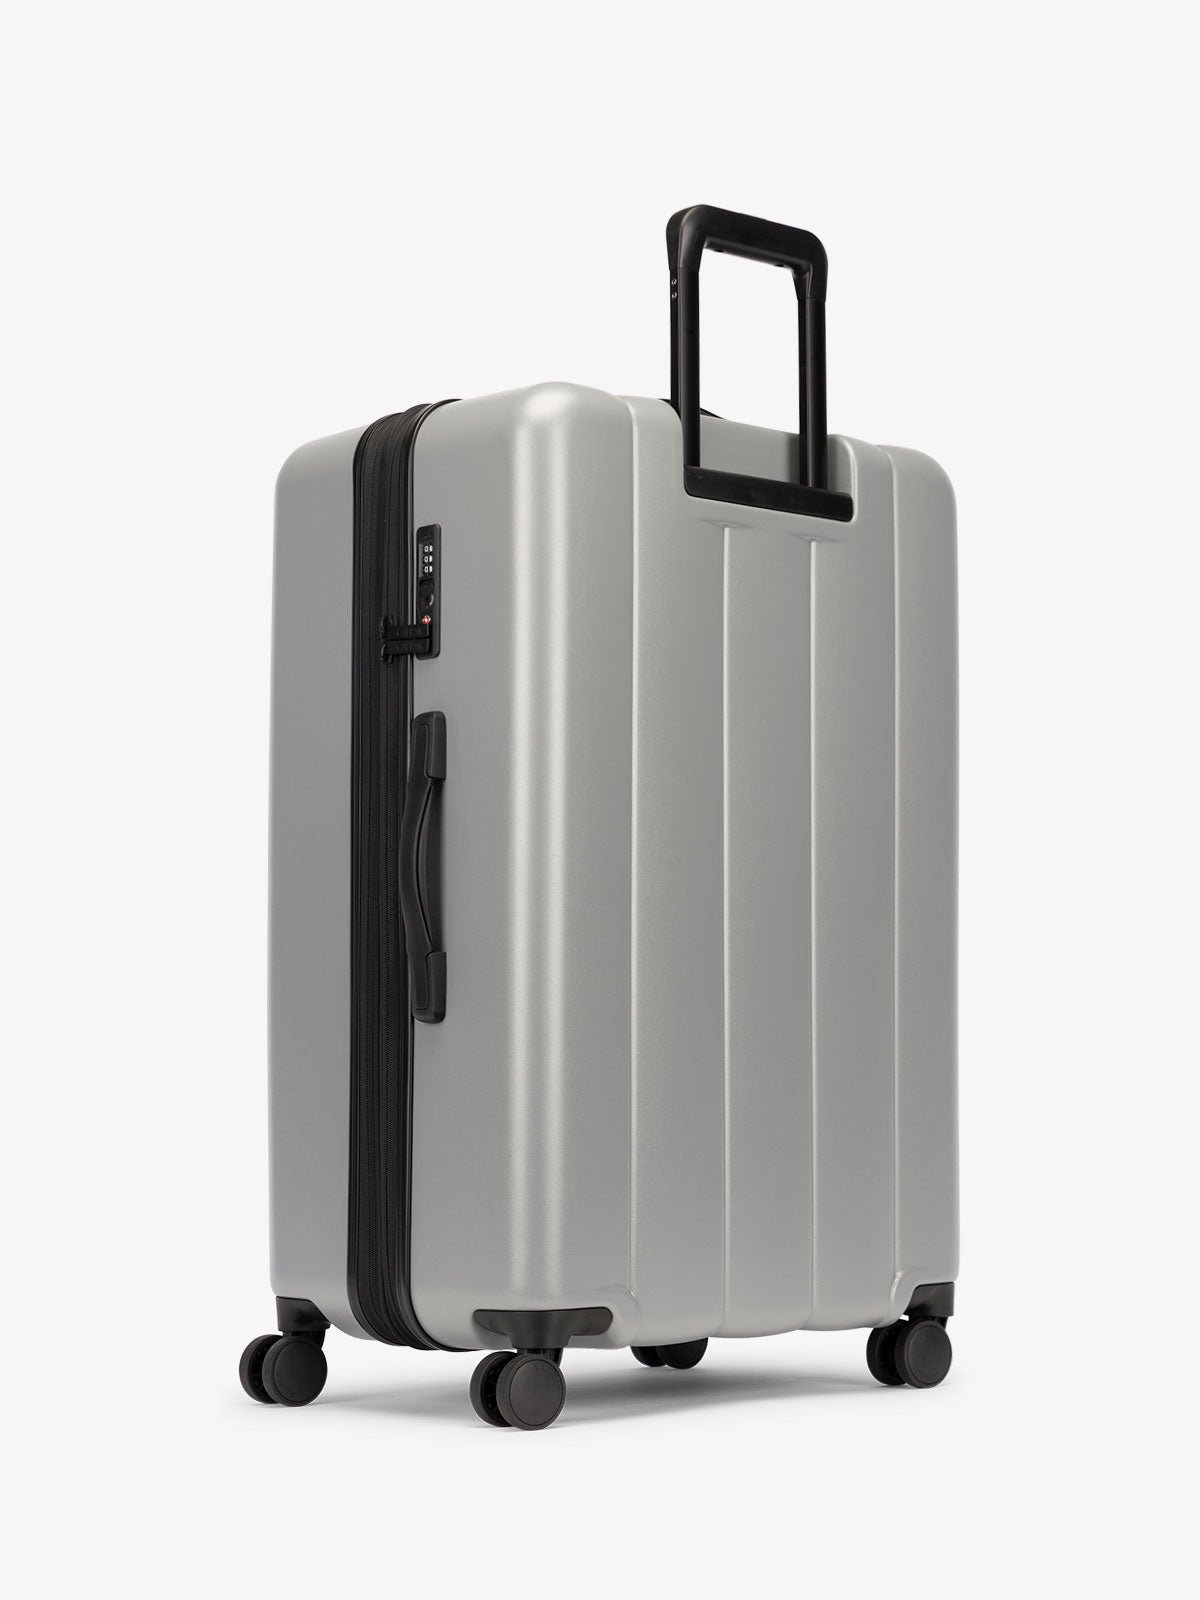 CALPAK large luggage featuring dual spinner wheels and bottom grab handle in gray